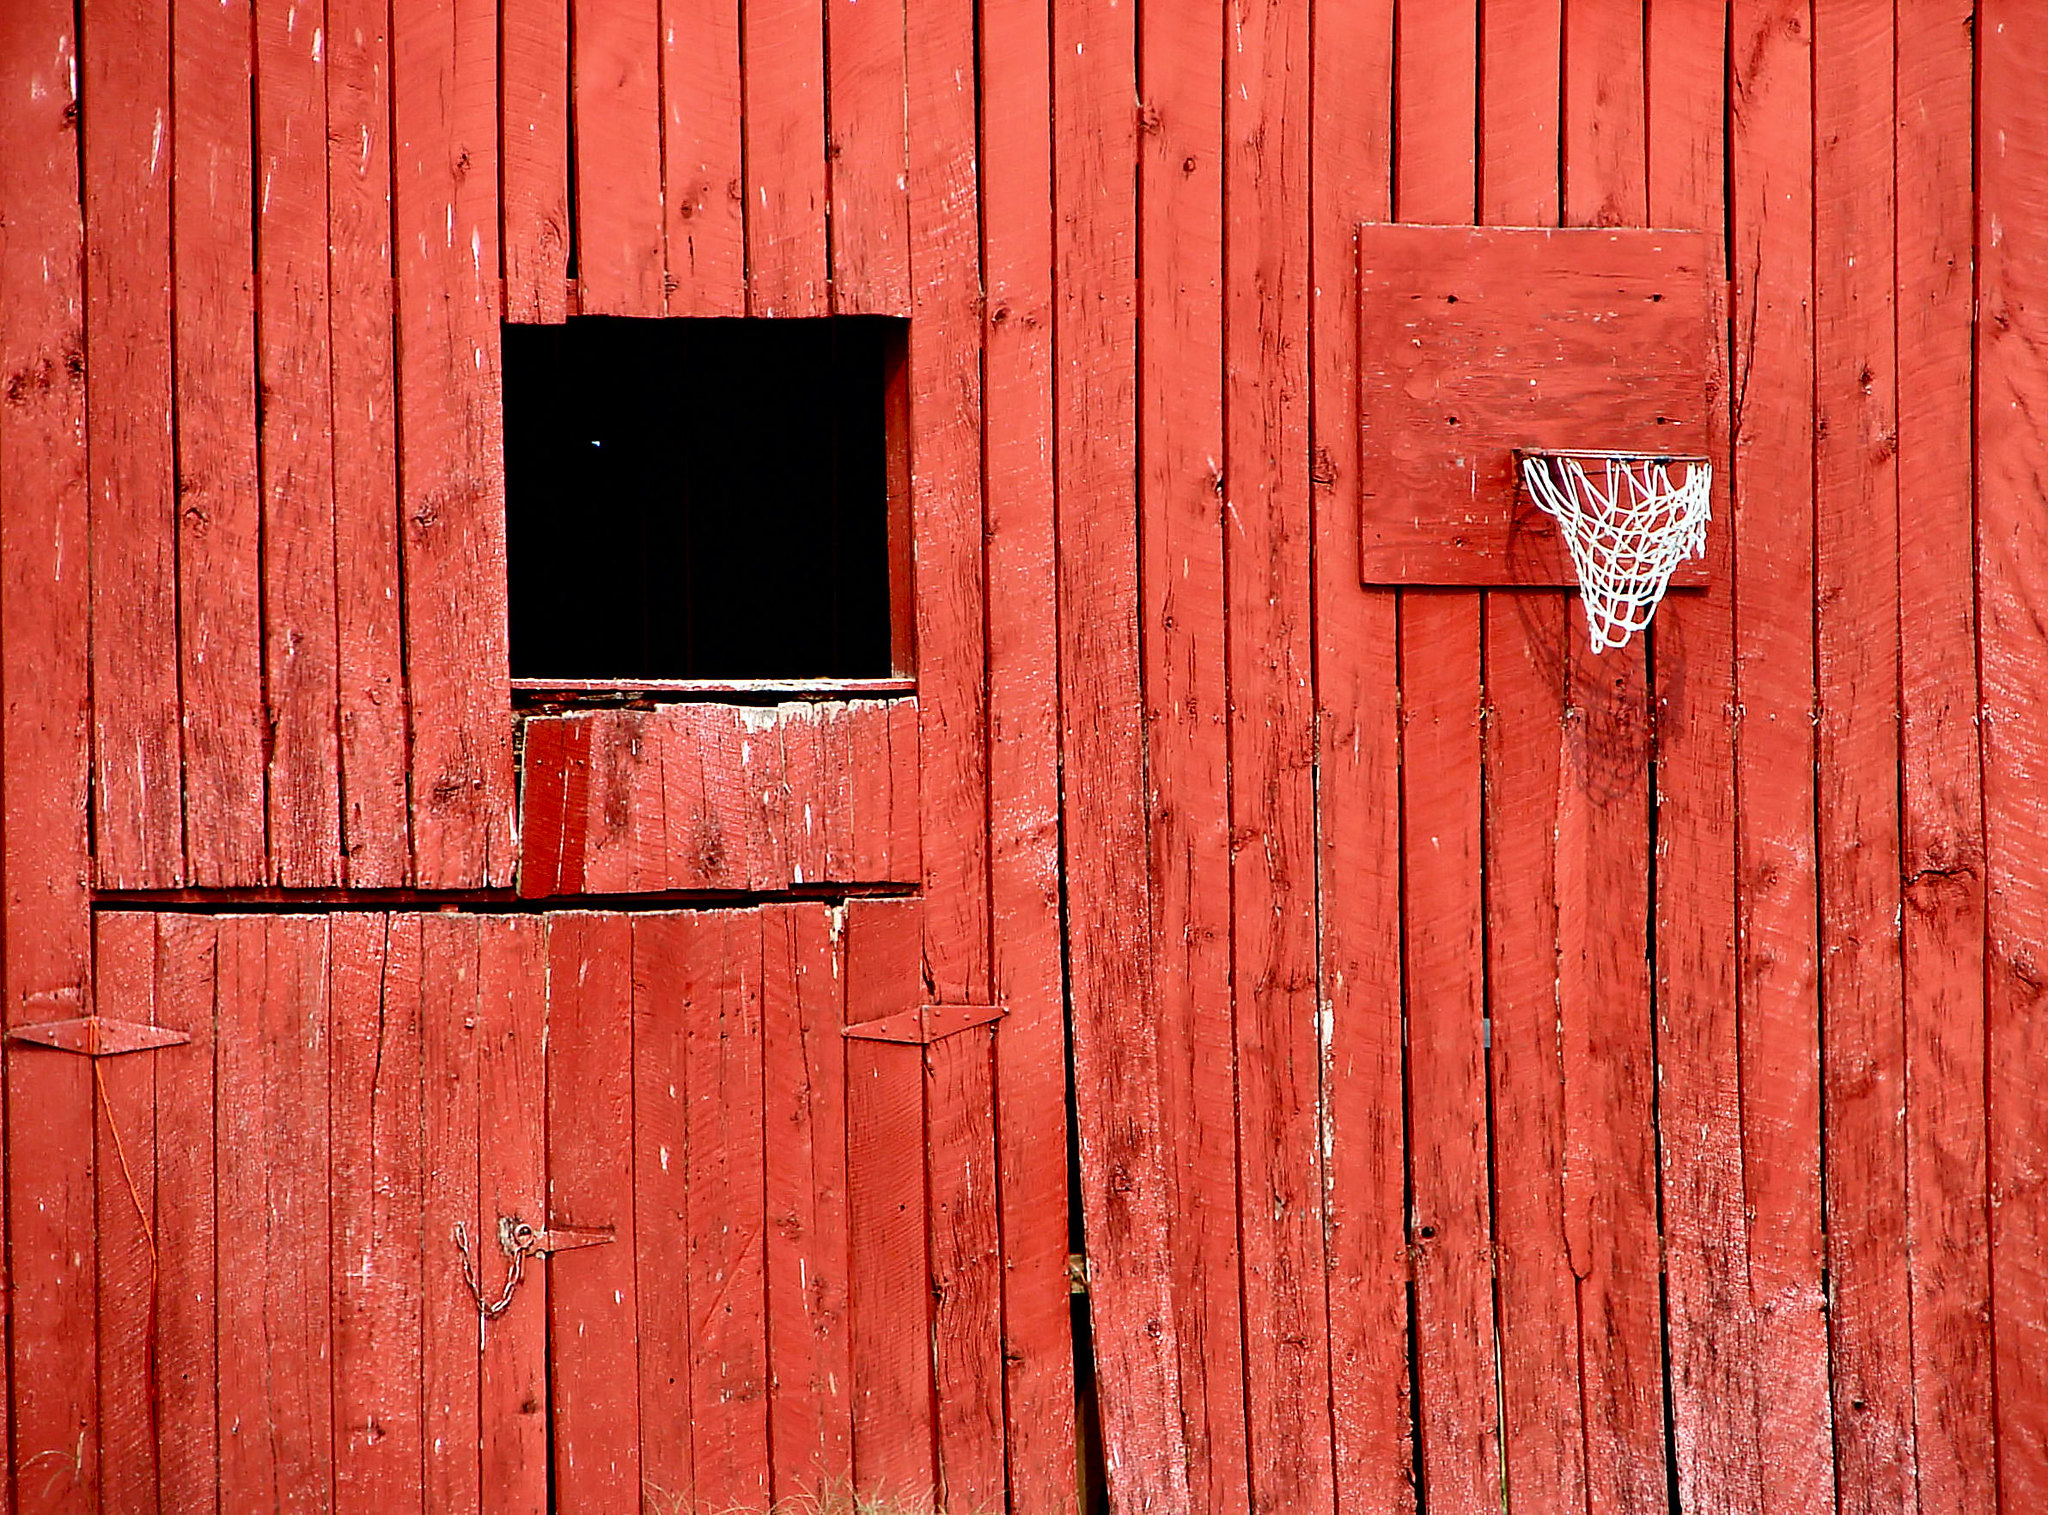 A red-painted wooden wall, likely the side of a barn. What's inside that gap?